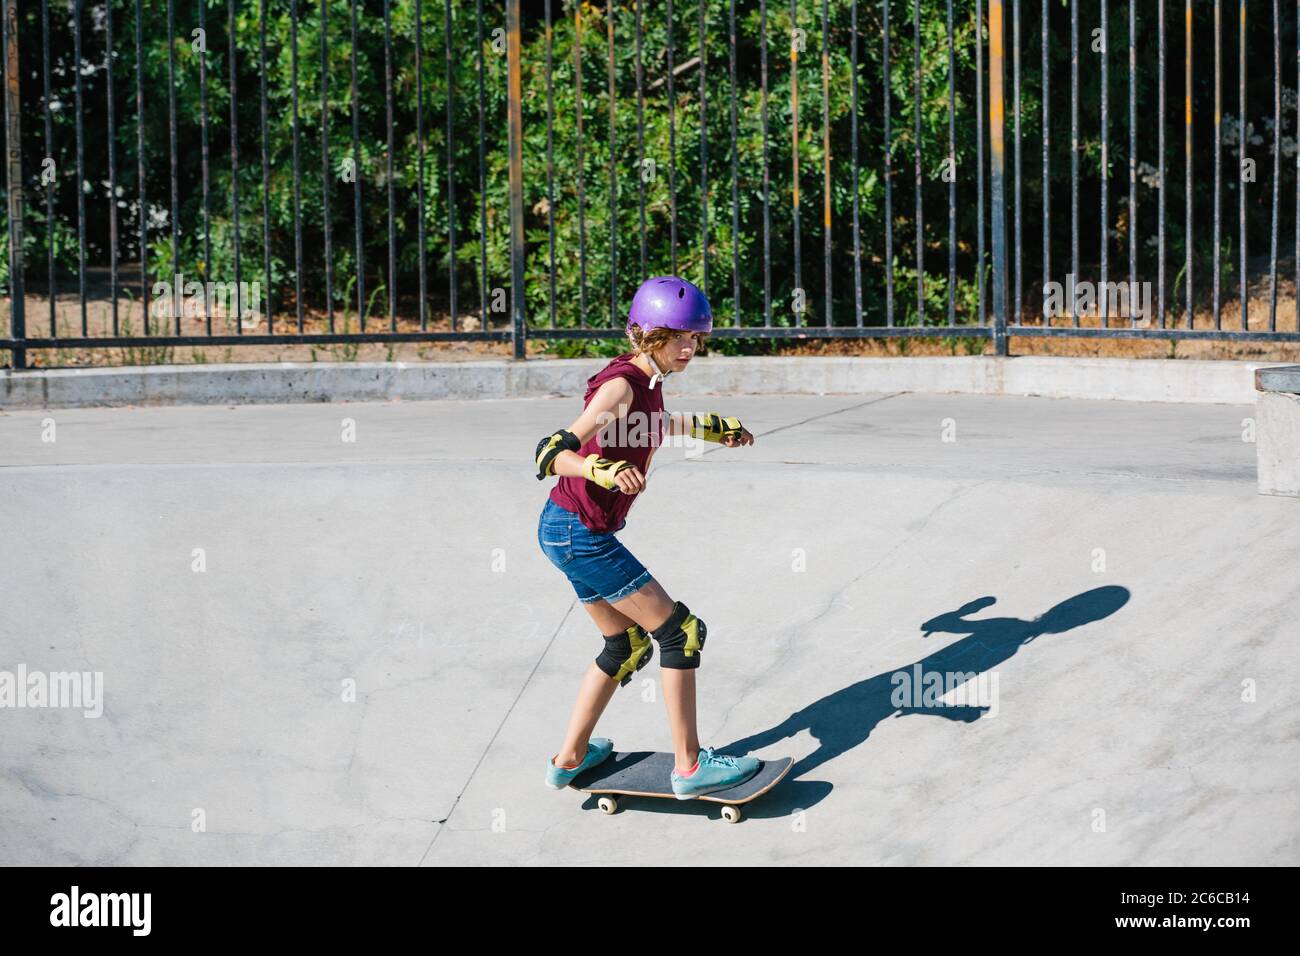 Teen girl in a purple helmet skateboards down a canyon at skate park Stock Photo